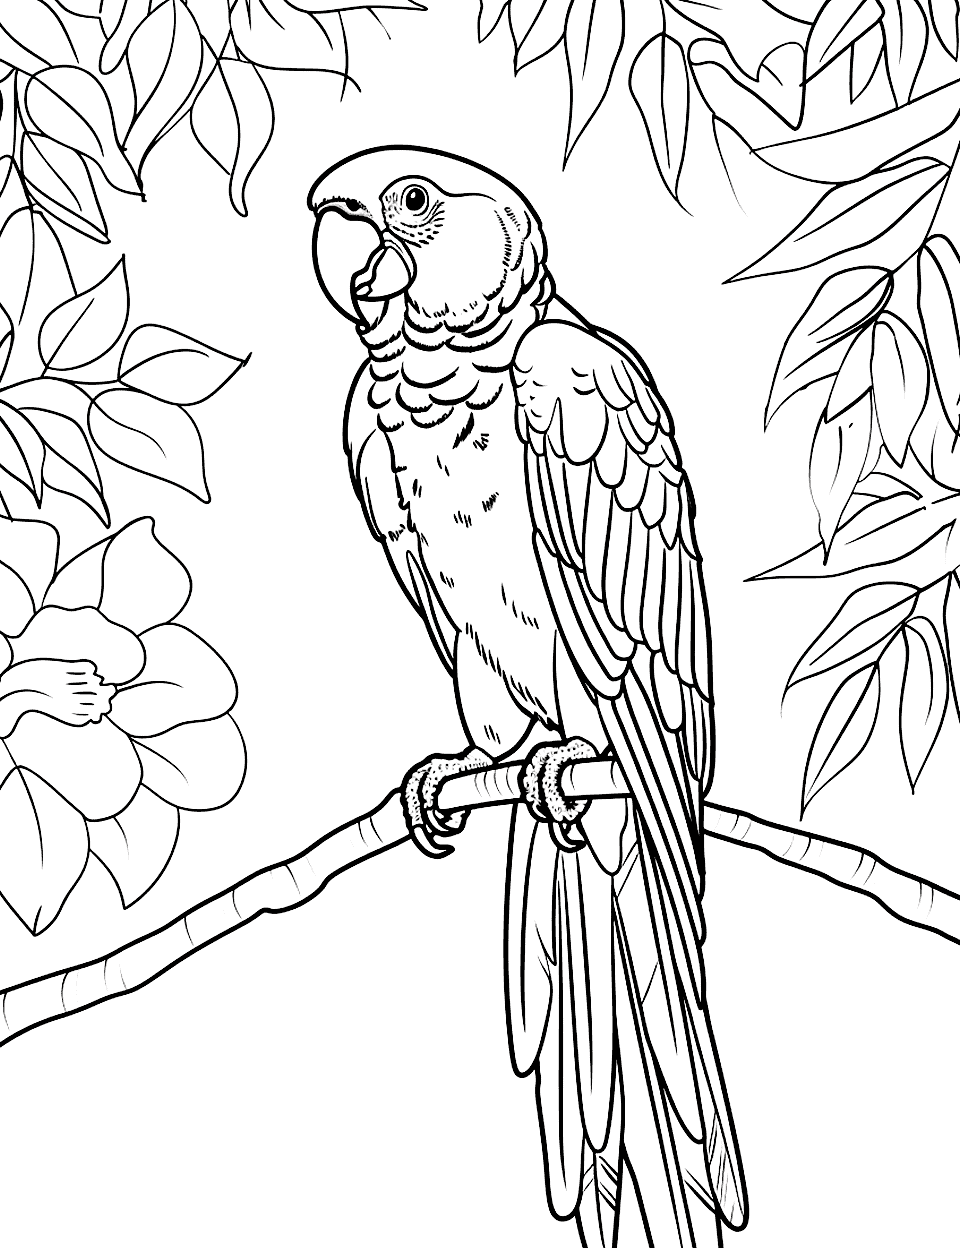 Parrot in a Tropical Forest Coloring Page - A vivid macaw perched on a lush branch surrounded by simple foliage.